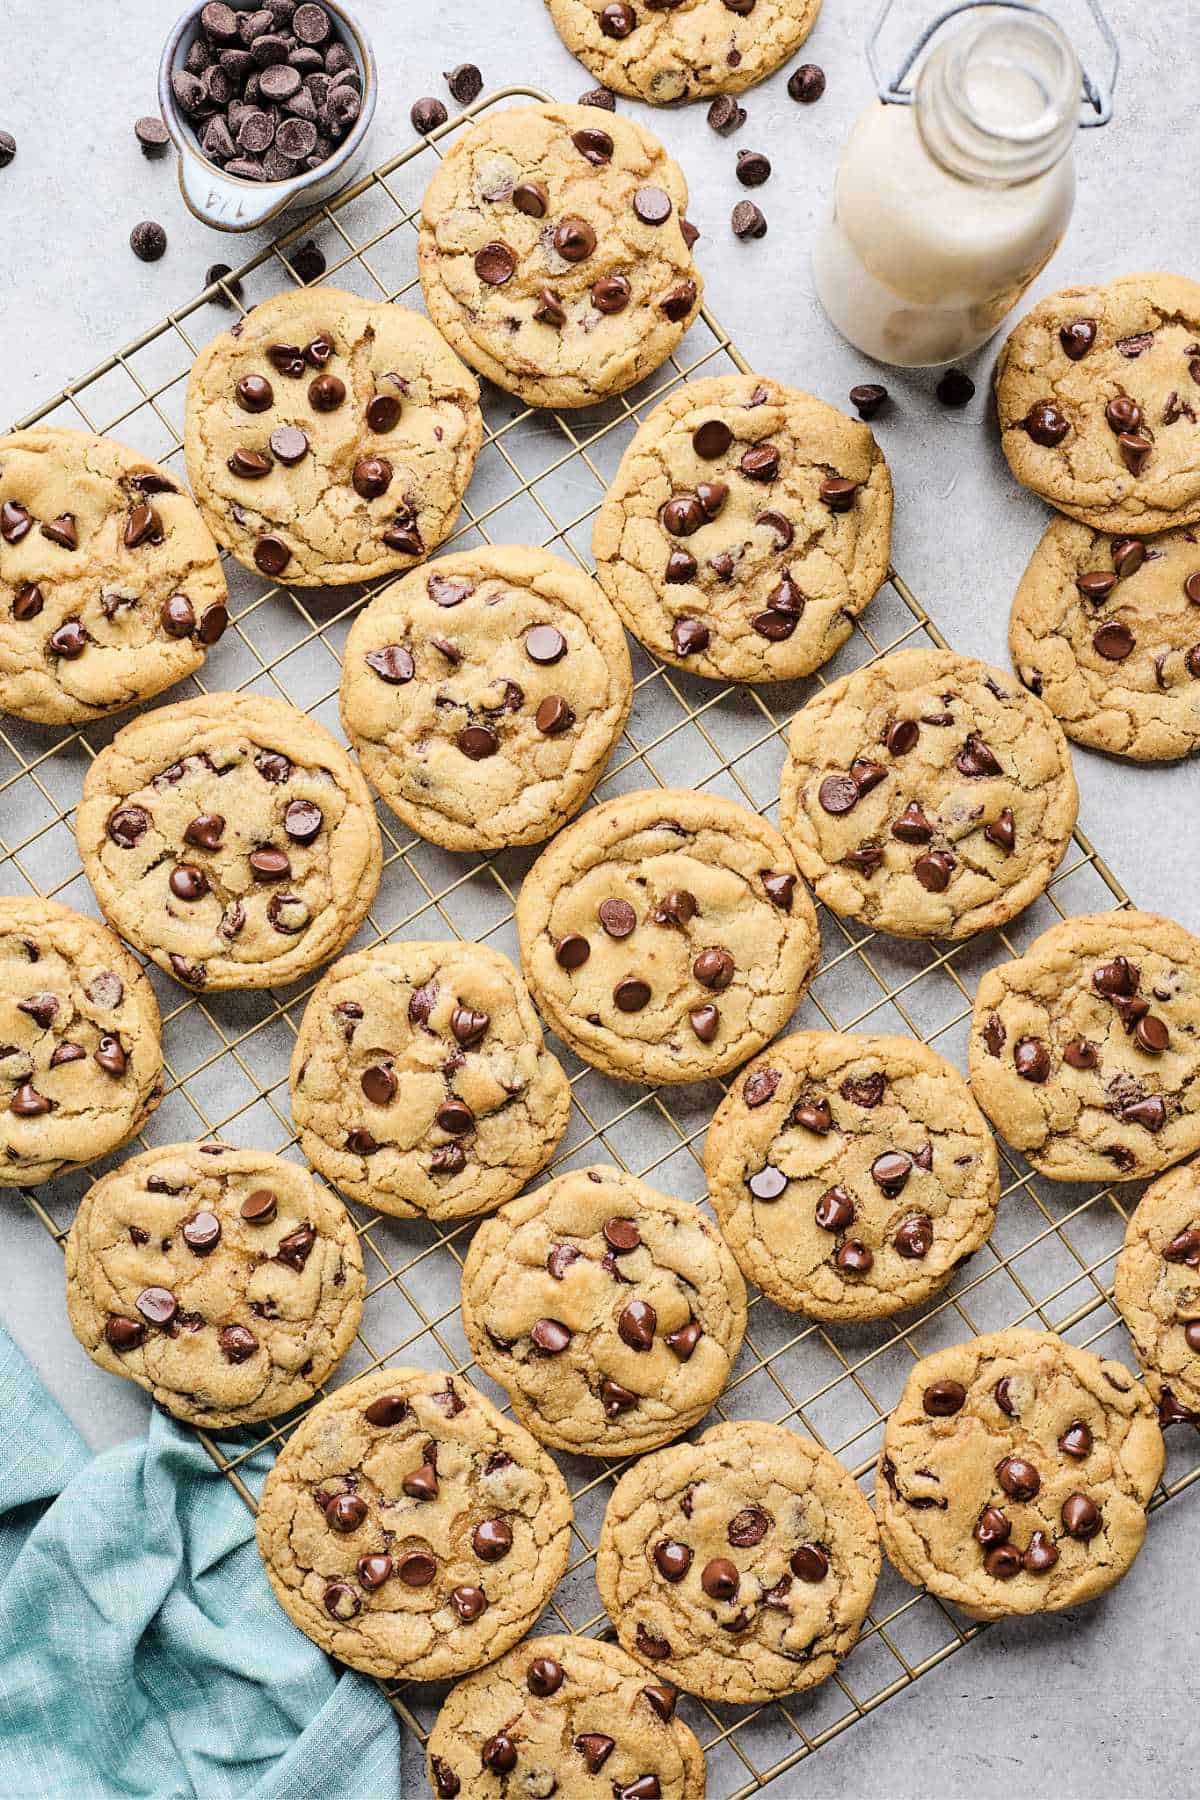 Overhead of several best chewy chocolate chip cookies against wire rack and white background